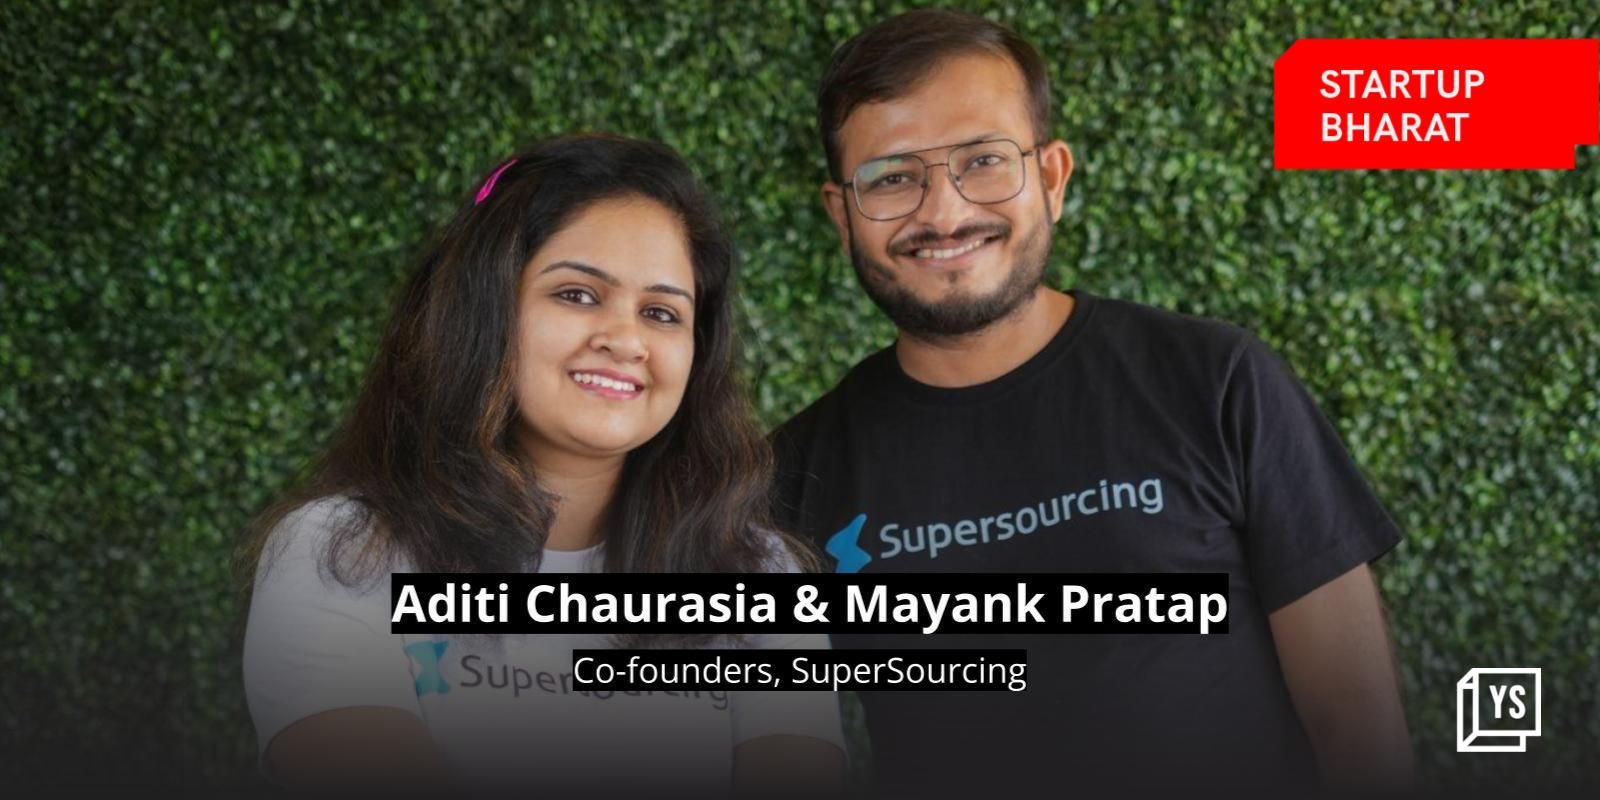 A startup from Indore is helping businesses onboard tech talent